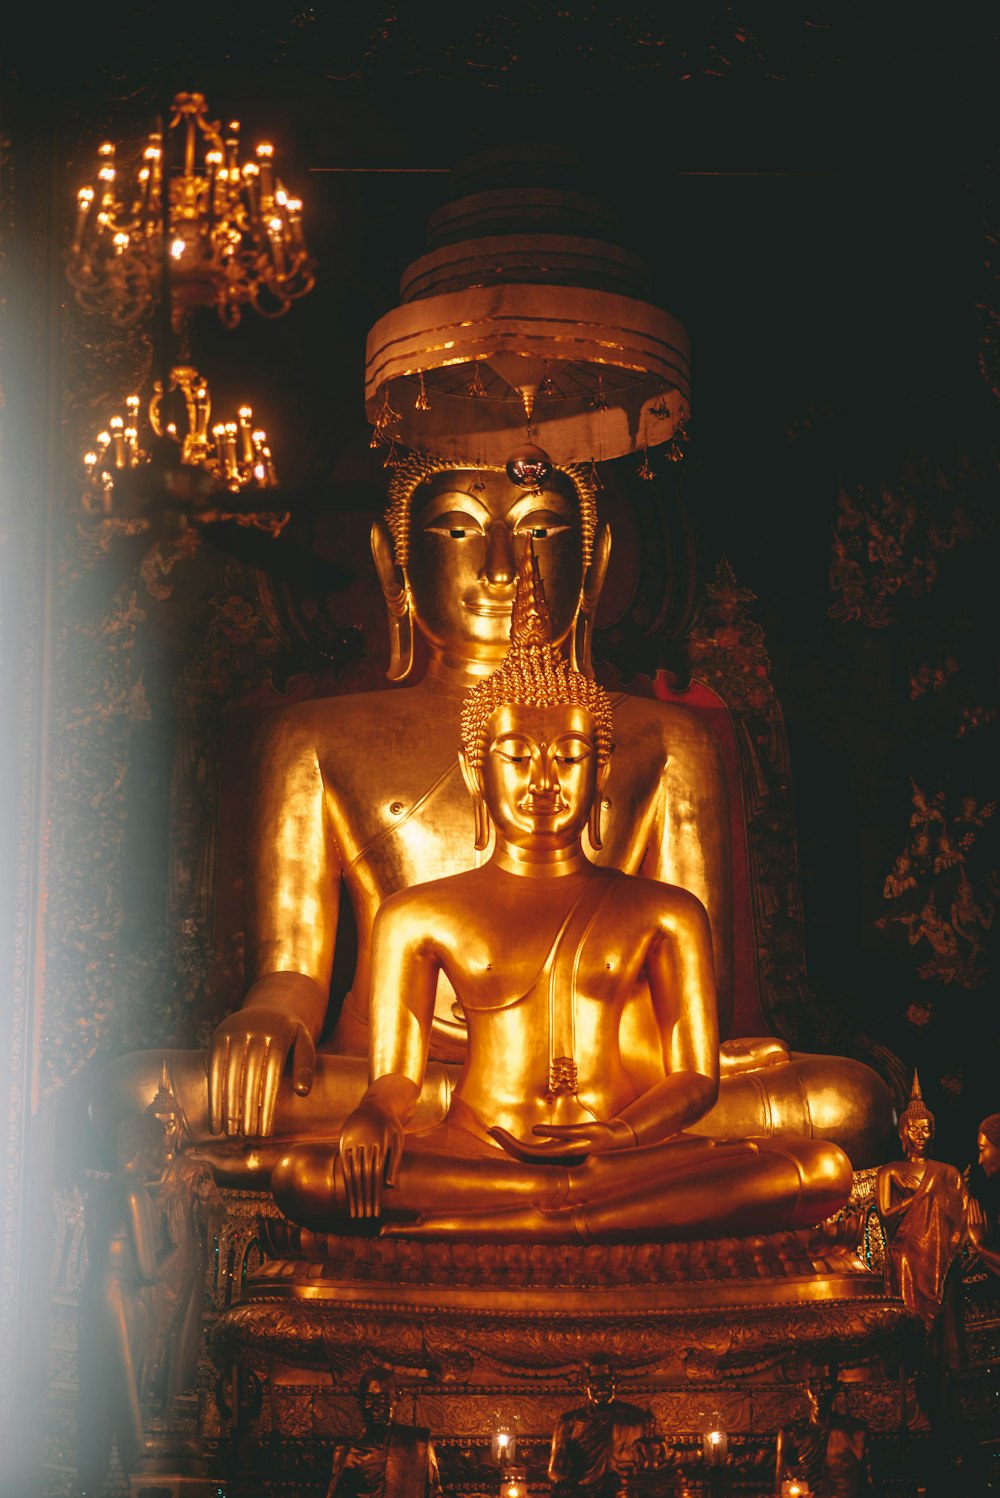 a golden buddha statue sitting in front of a chandelier